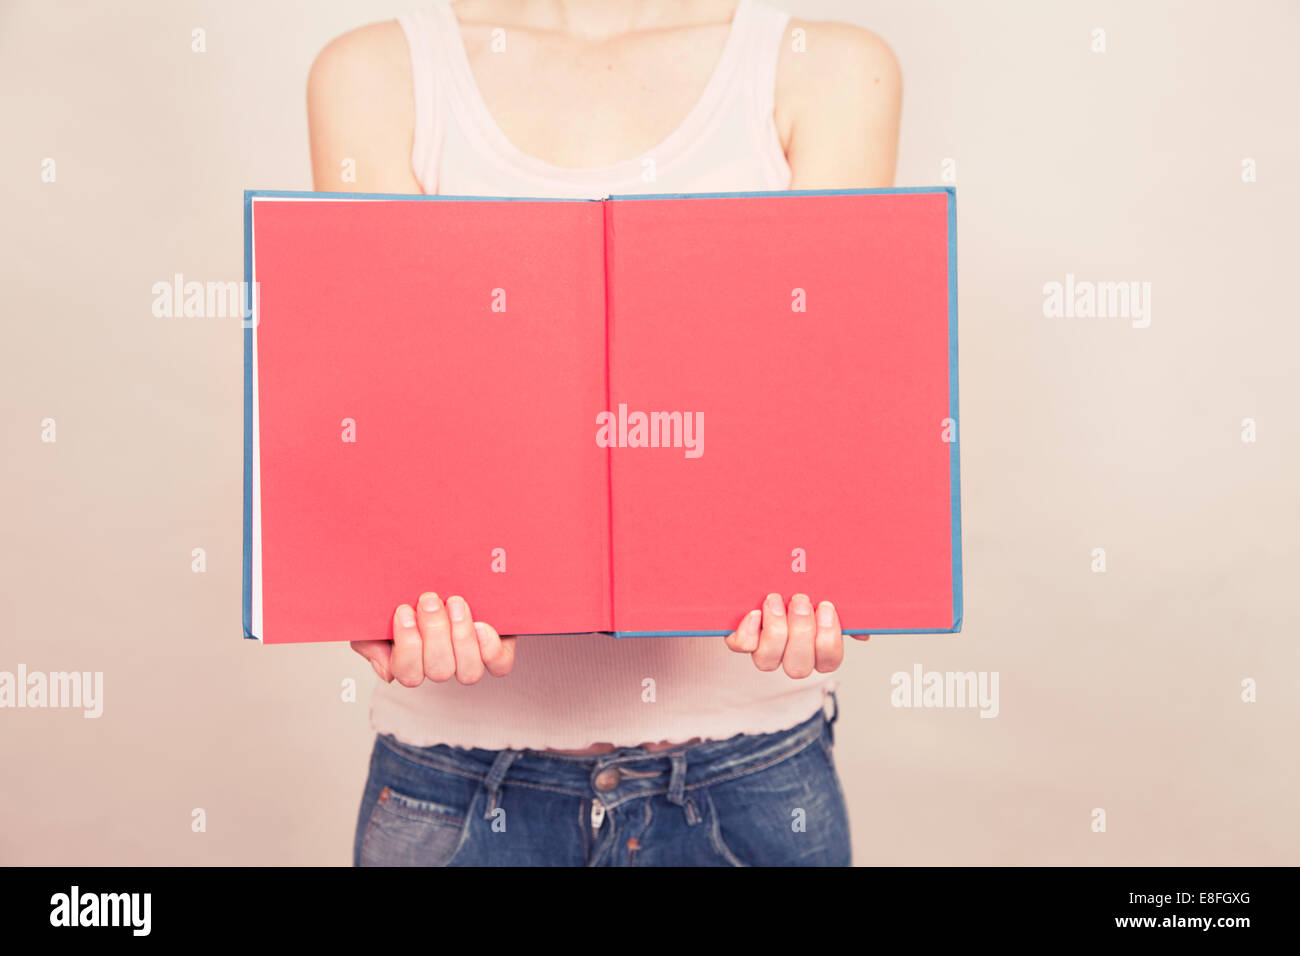 Woman holding book open with blank pages Stock Photo